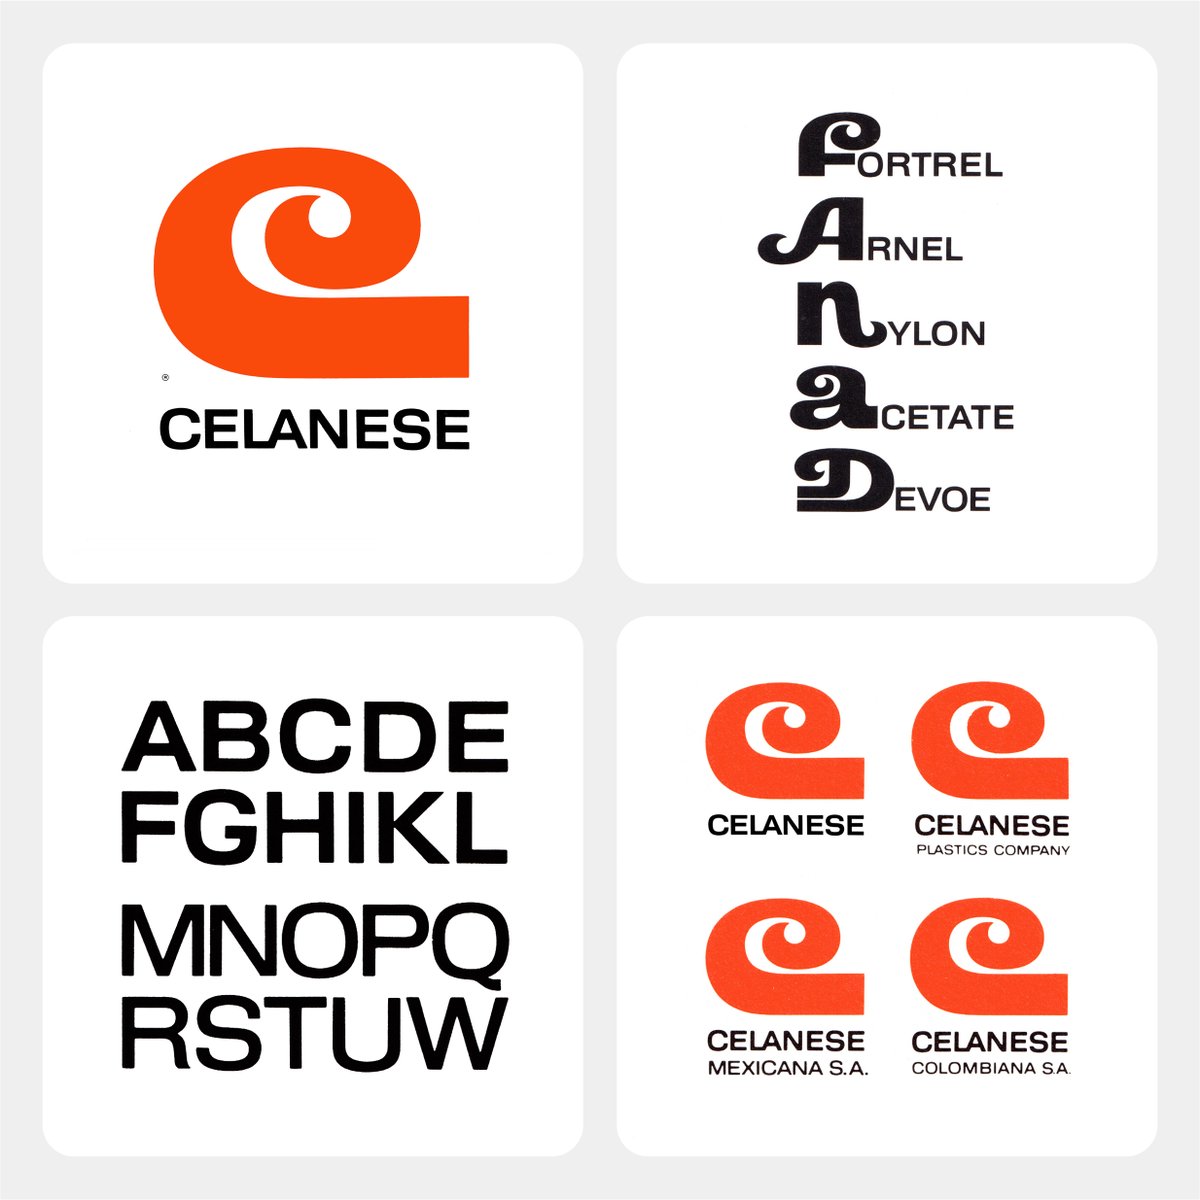 New on Logo Histories: A dramatised unity – Saul Bass and Associates' 1965 logo for industrial manufacturer Celanese

Read at logohistories.com/p/saul-bass-ce…

#logos #branding #designhistory #designx #logohistories